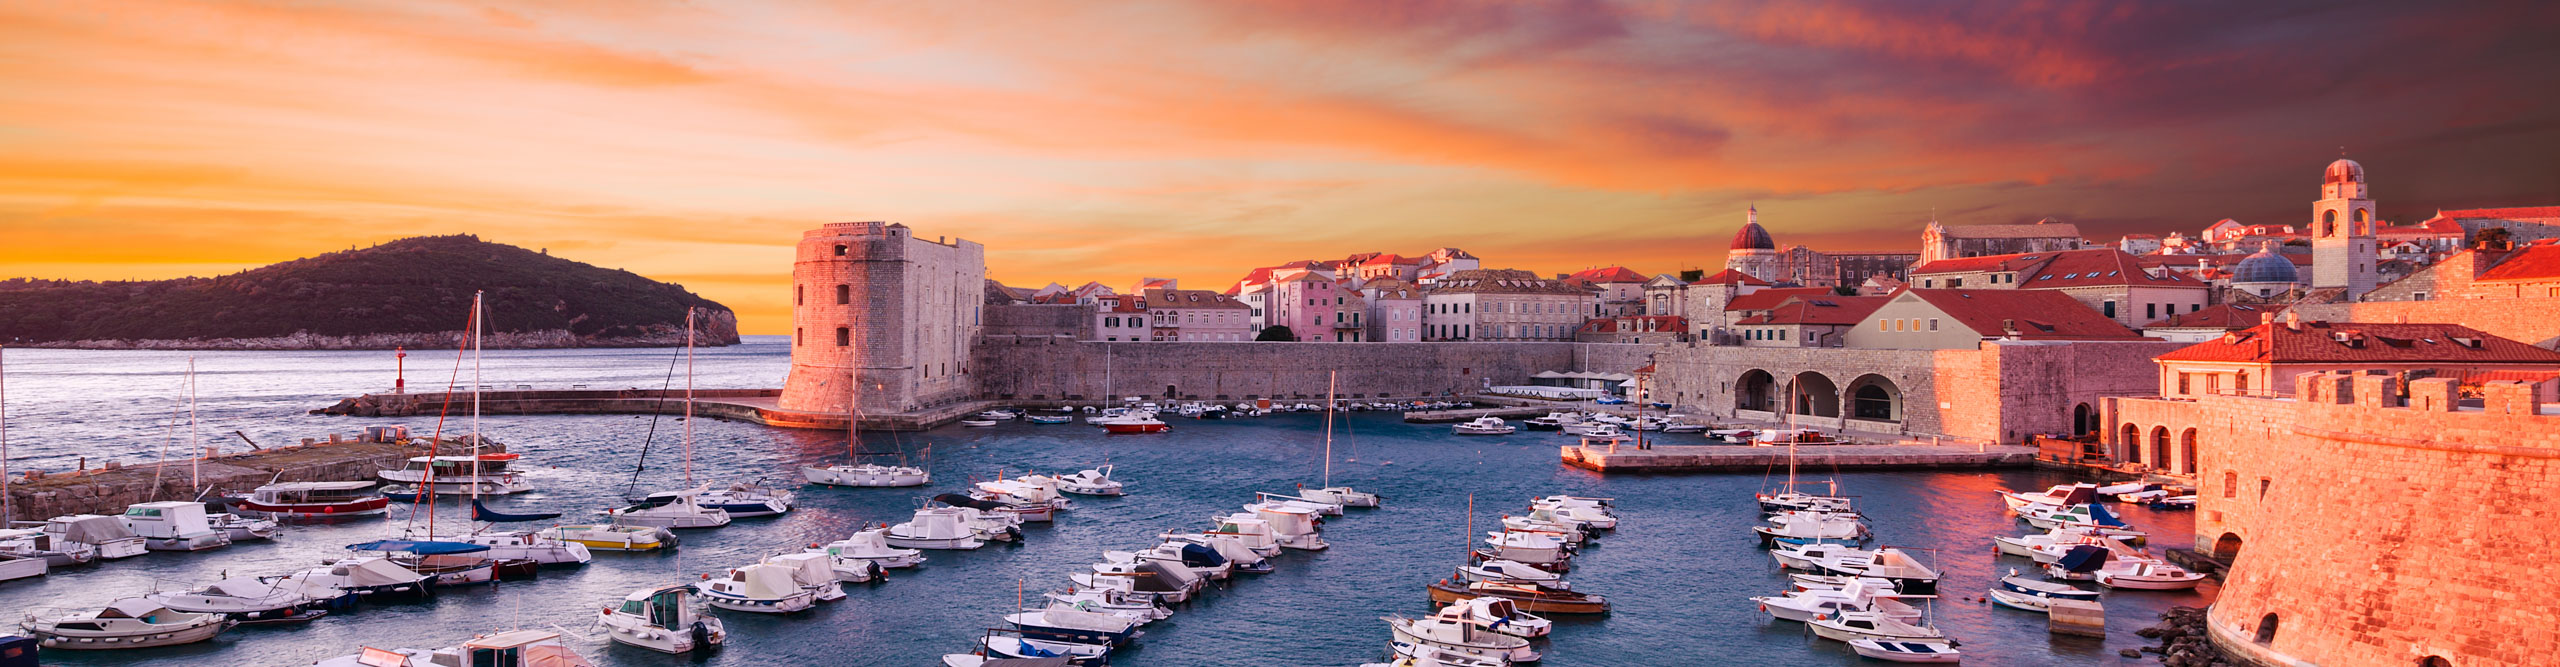 Dramatic sunset, with purple and orange clouds, over boats in the harbour, Dubrovnik, Croatia